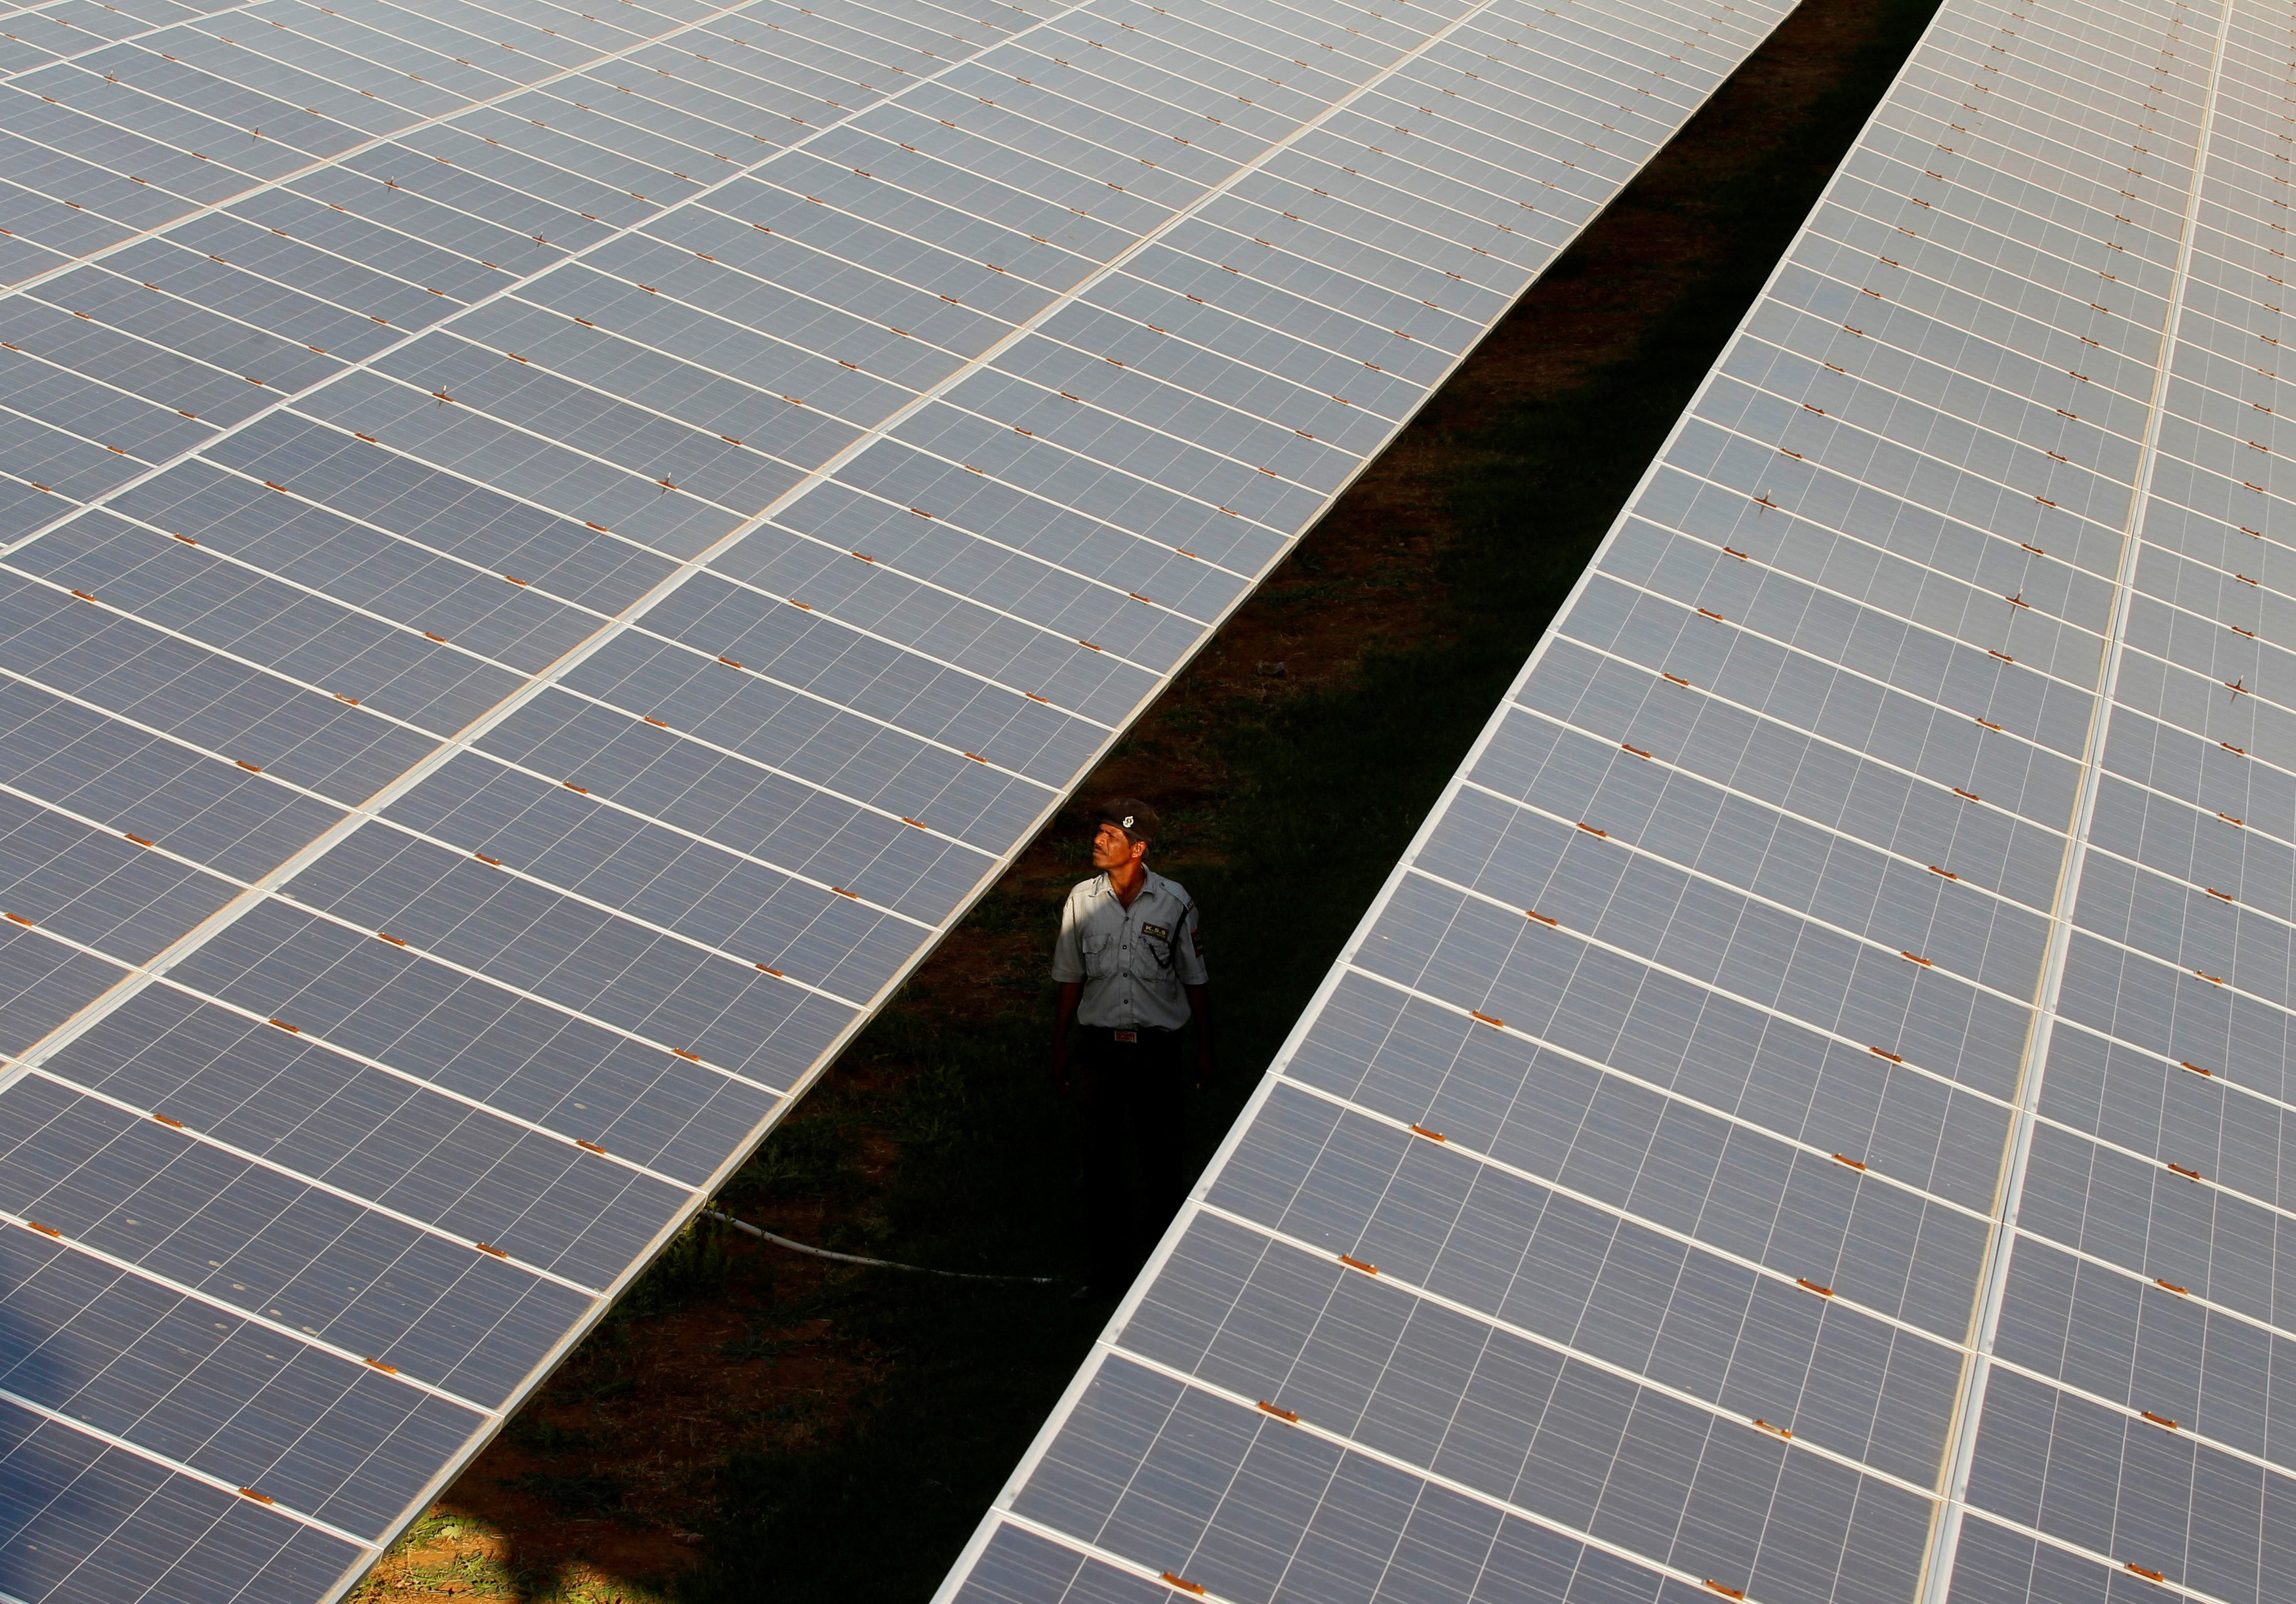 A private security guard walks between rows of photovoltaic solar panels inside a solar power plant at Raisan